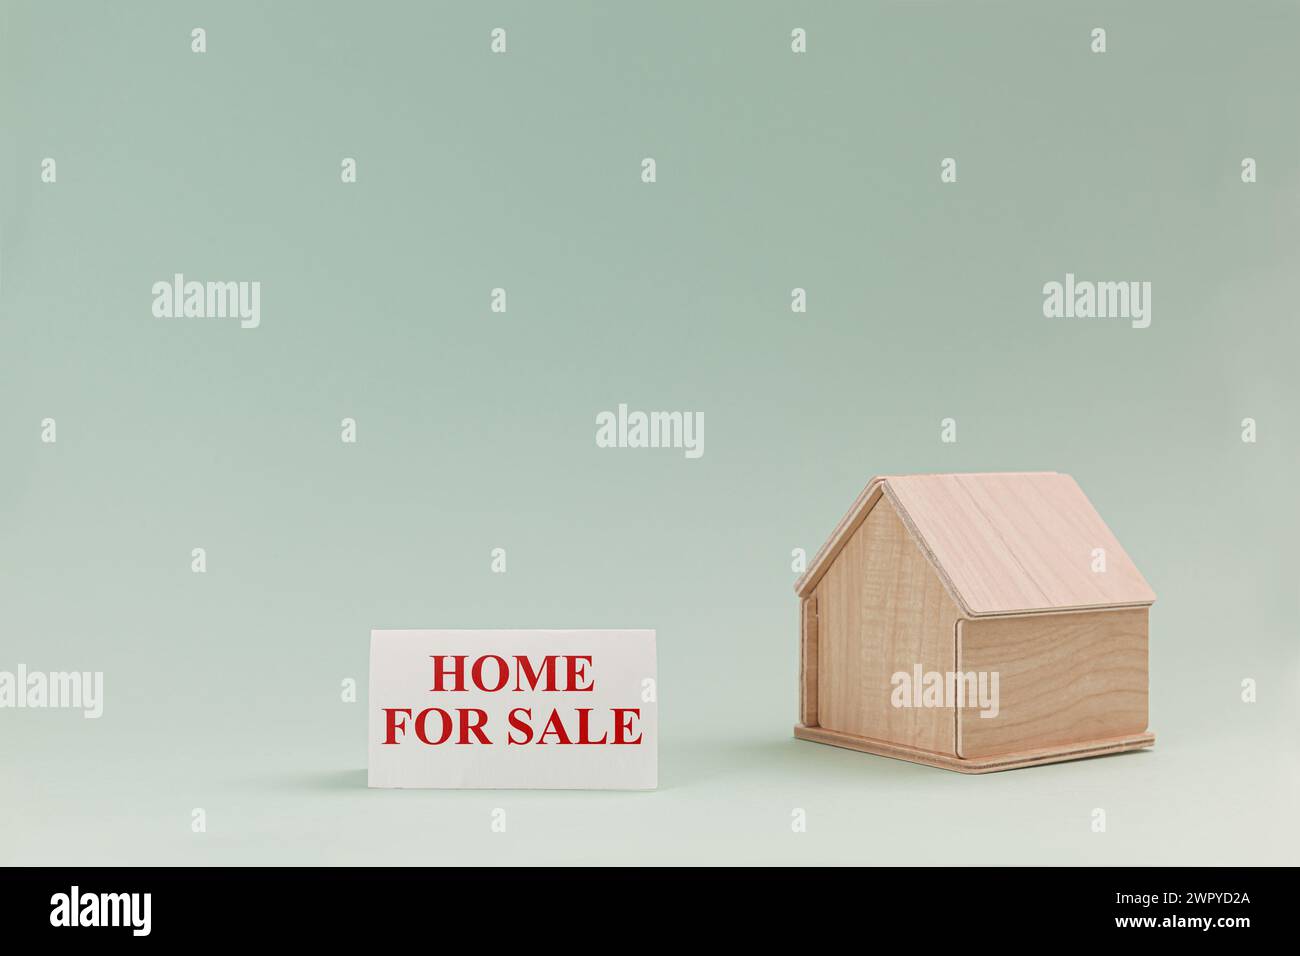 Simplistic wooden house model isolated on pale green background, with text Home For Sale on signboard. Stock Photo